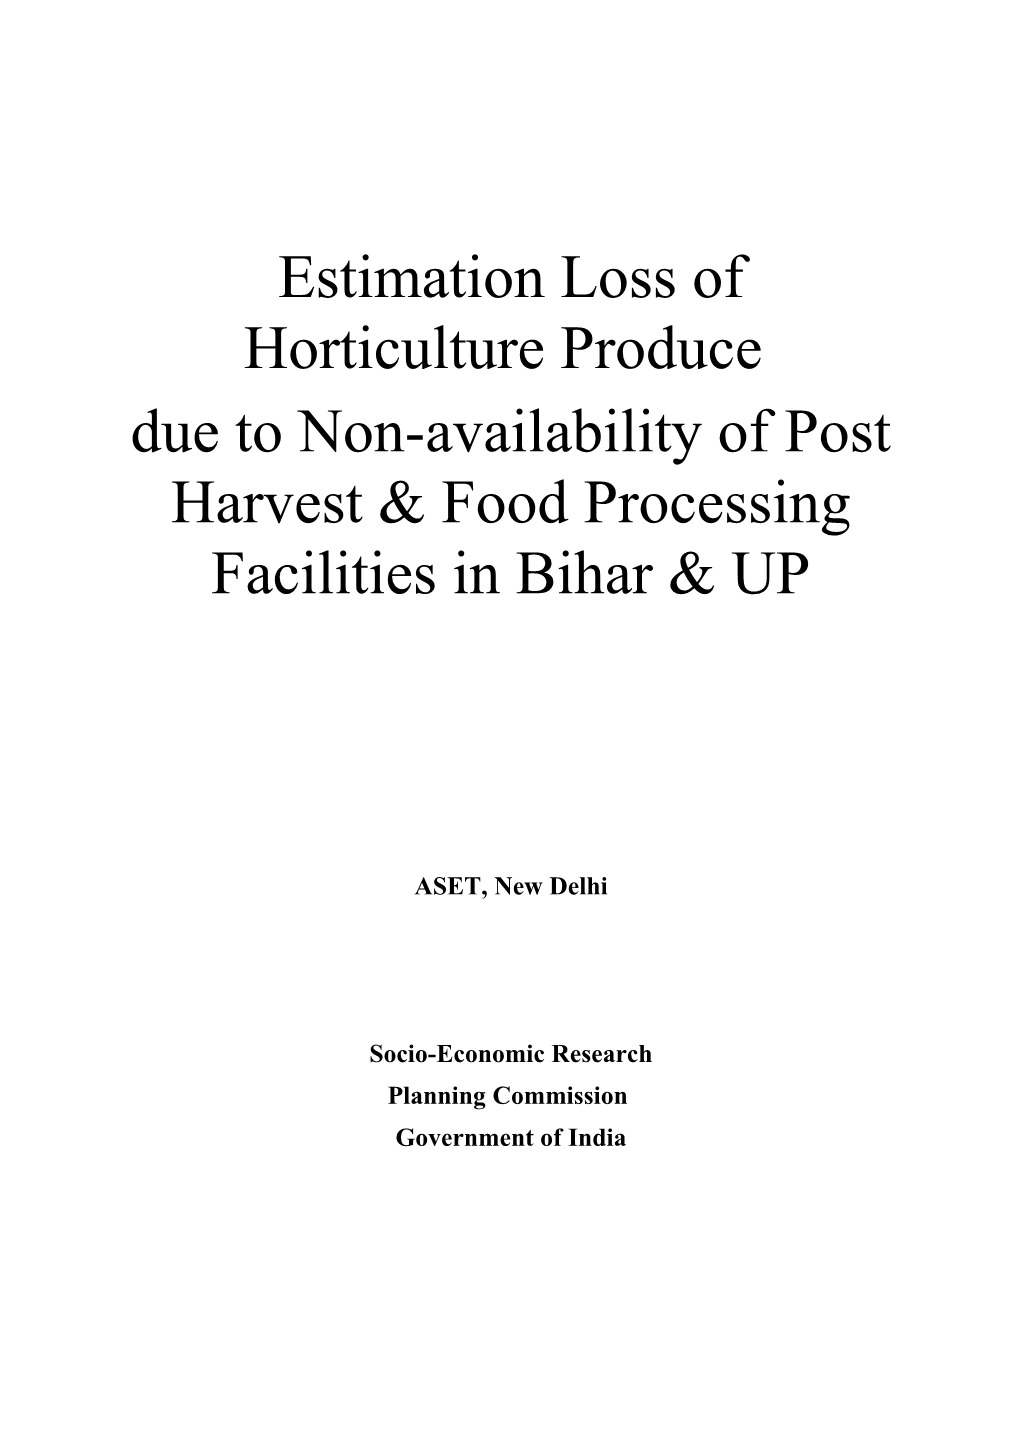 Estimation Loss of Horticulture Produce